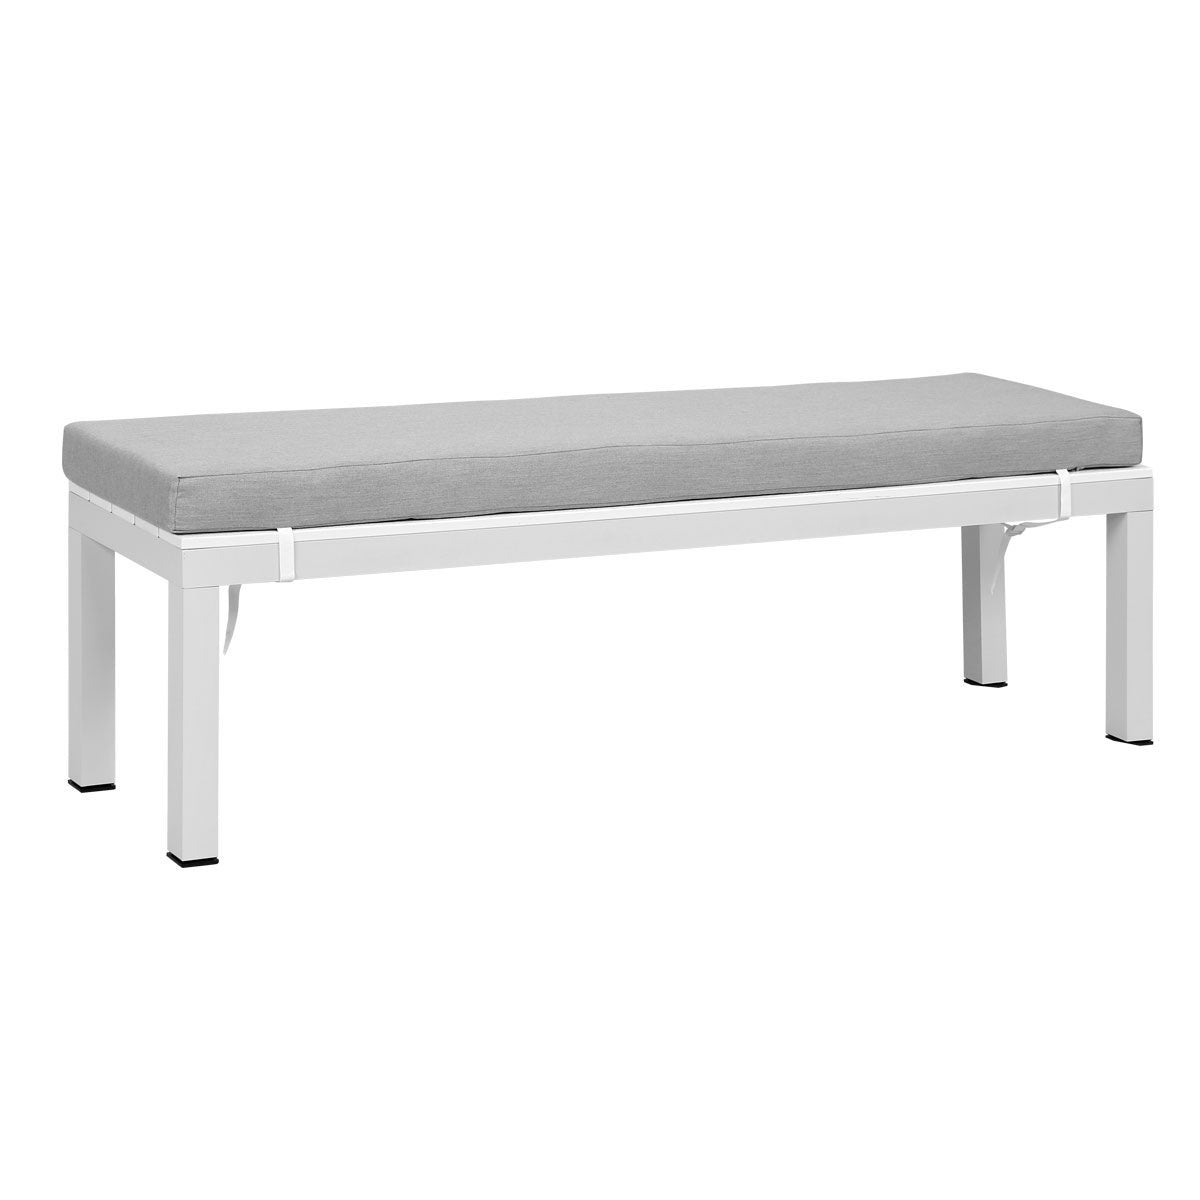 Manly White Aluminium Outdoor Faux wood Top Bench with Light Grey Cushion (Set of Two)